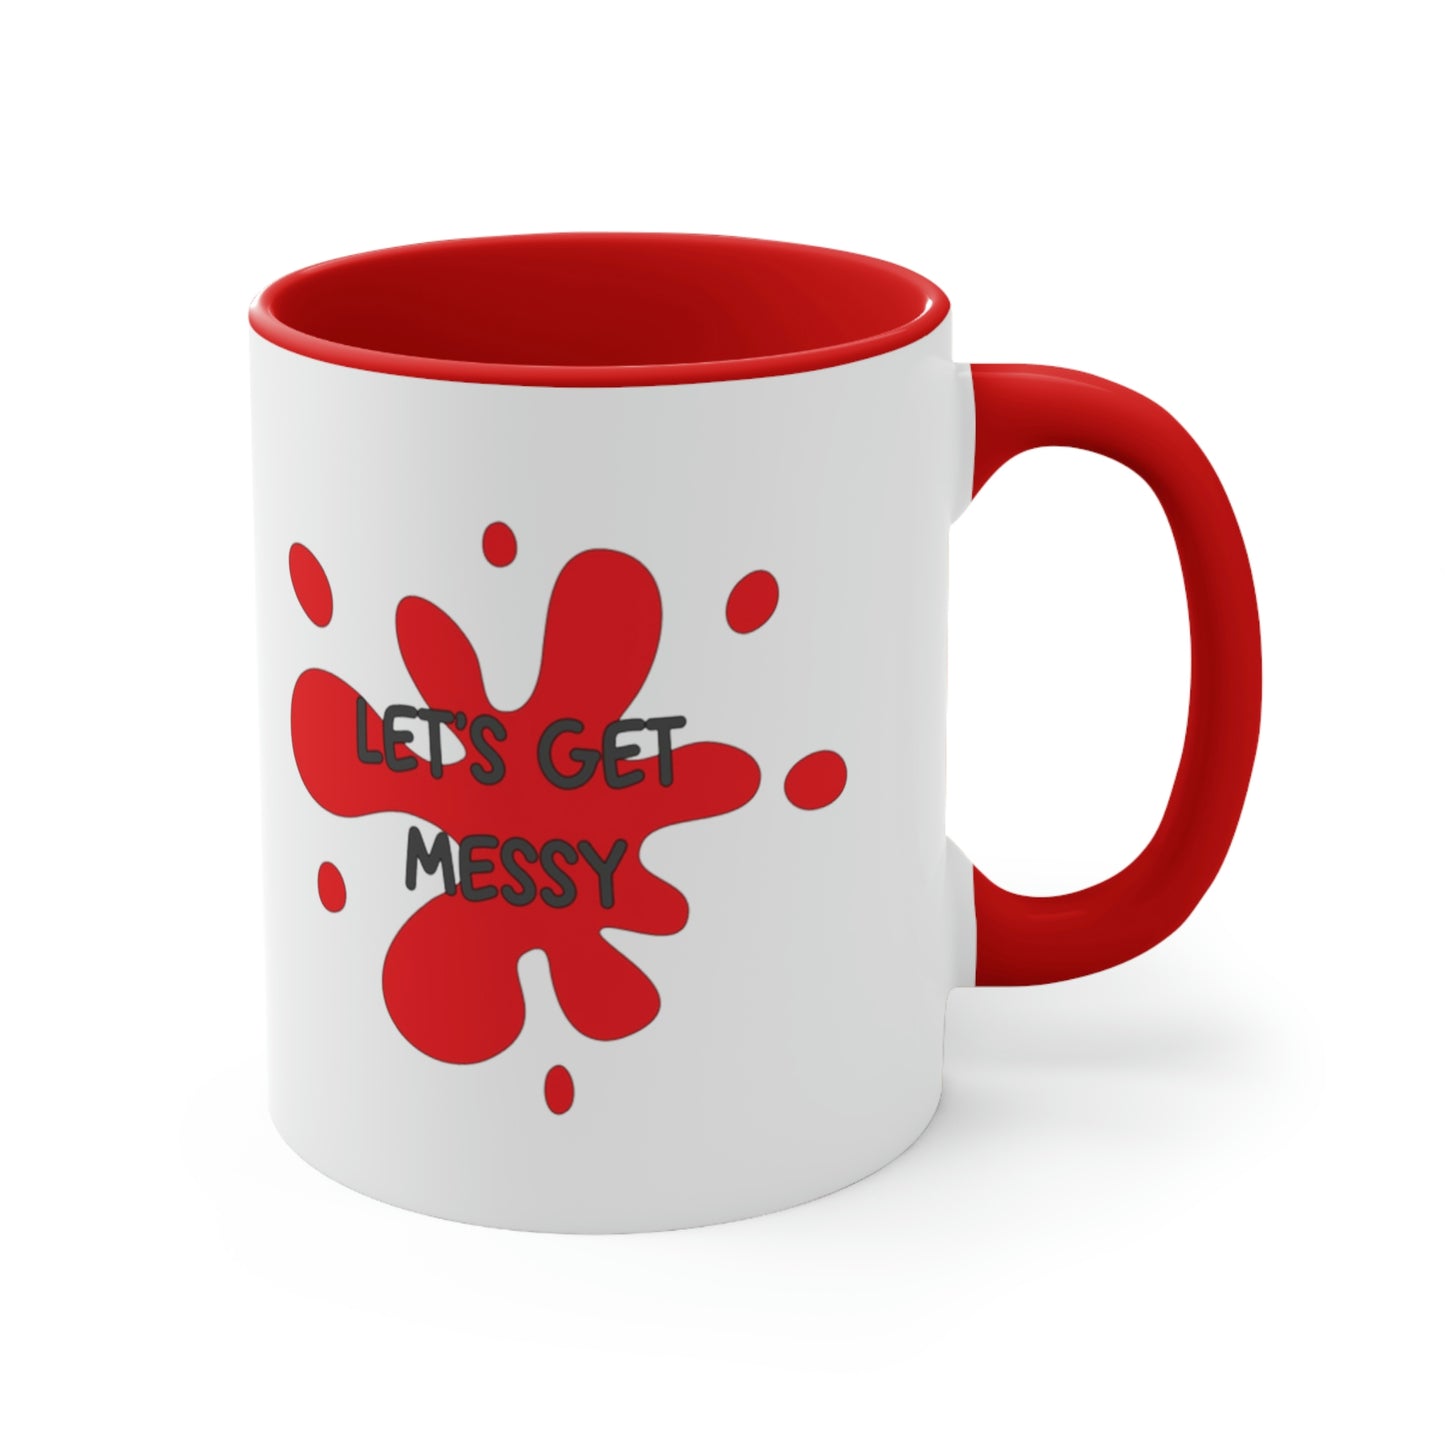 "Let's Get Messy" Accent Coffee Mug, 11oz